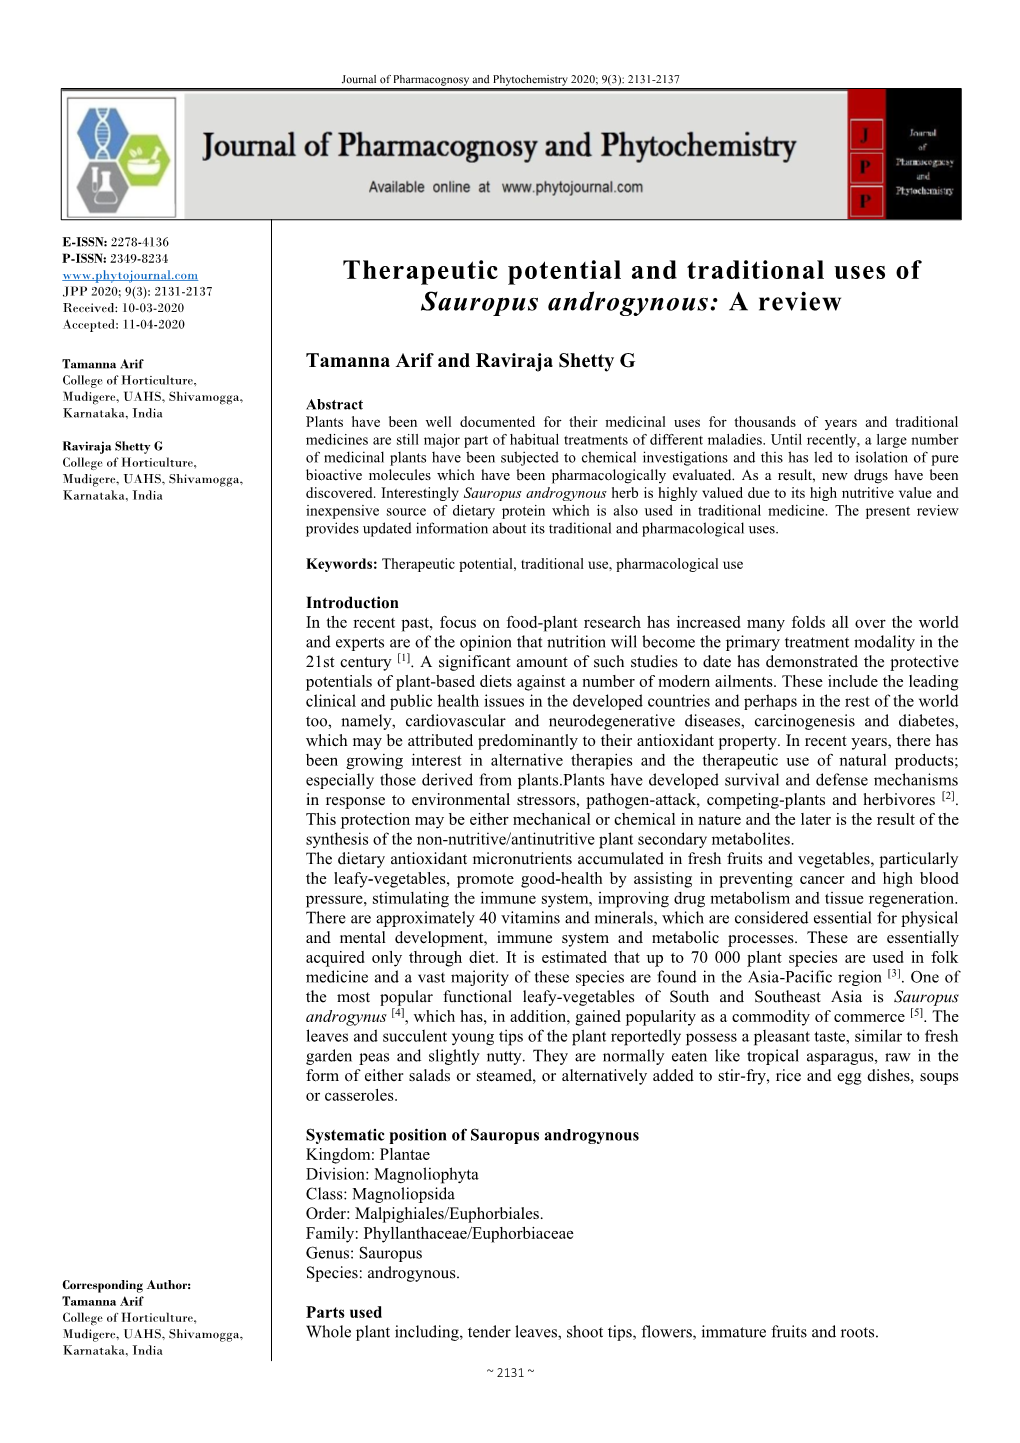 Therapeutic Potential and Traditional Uses of Sauropus Androgynous: A